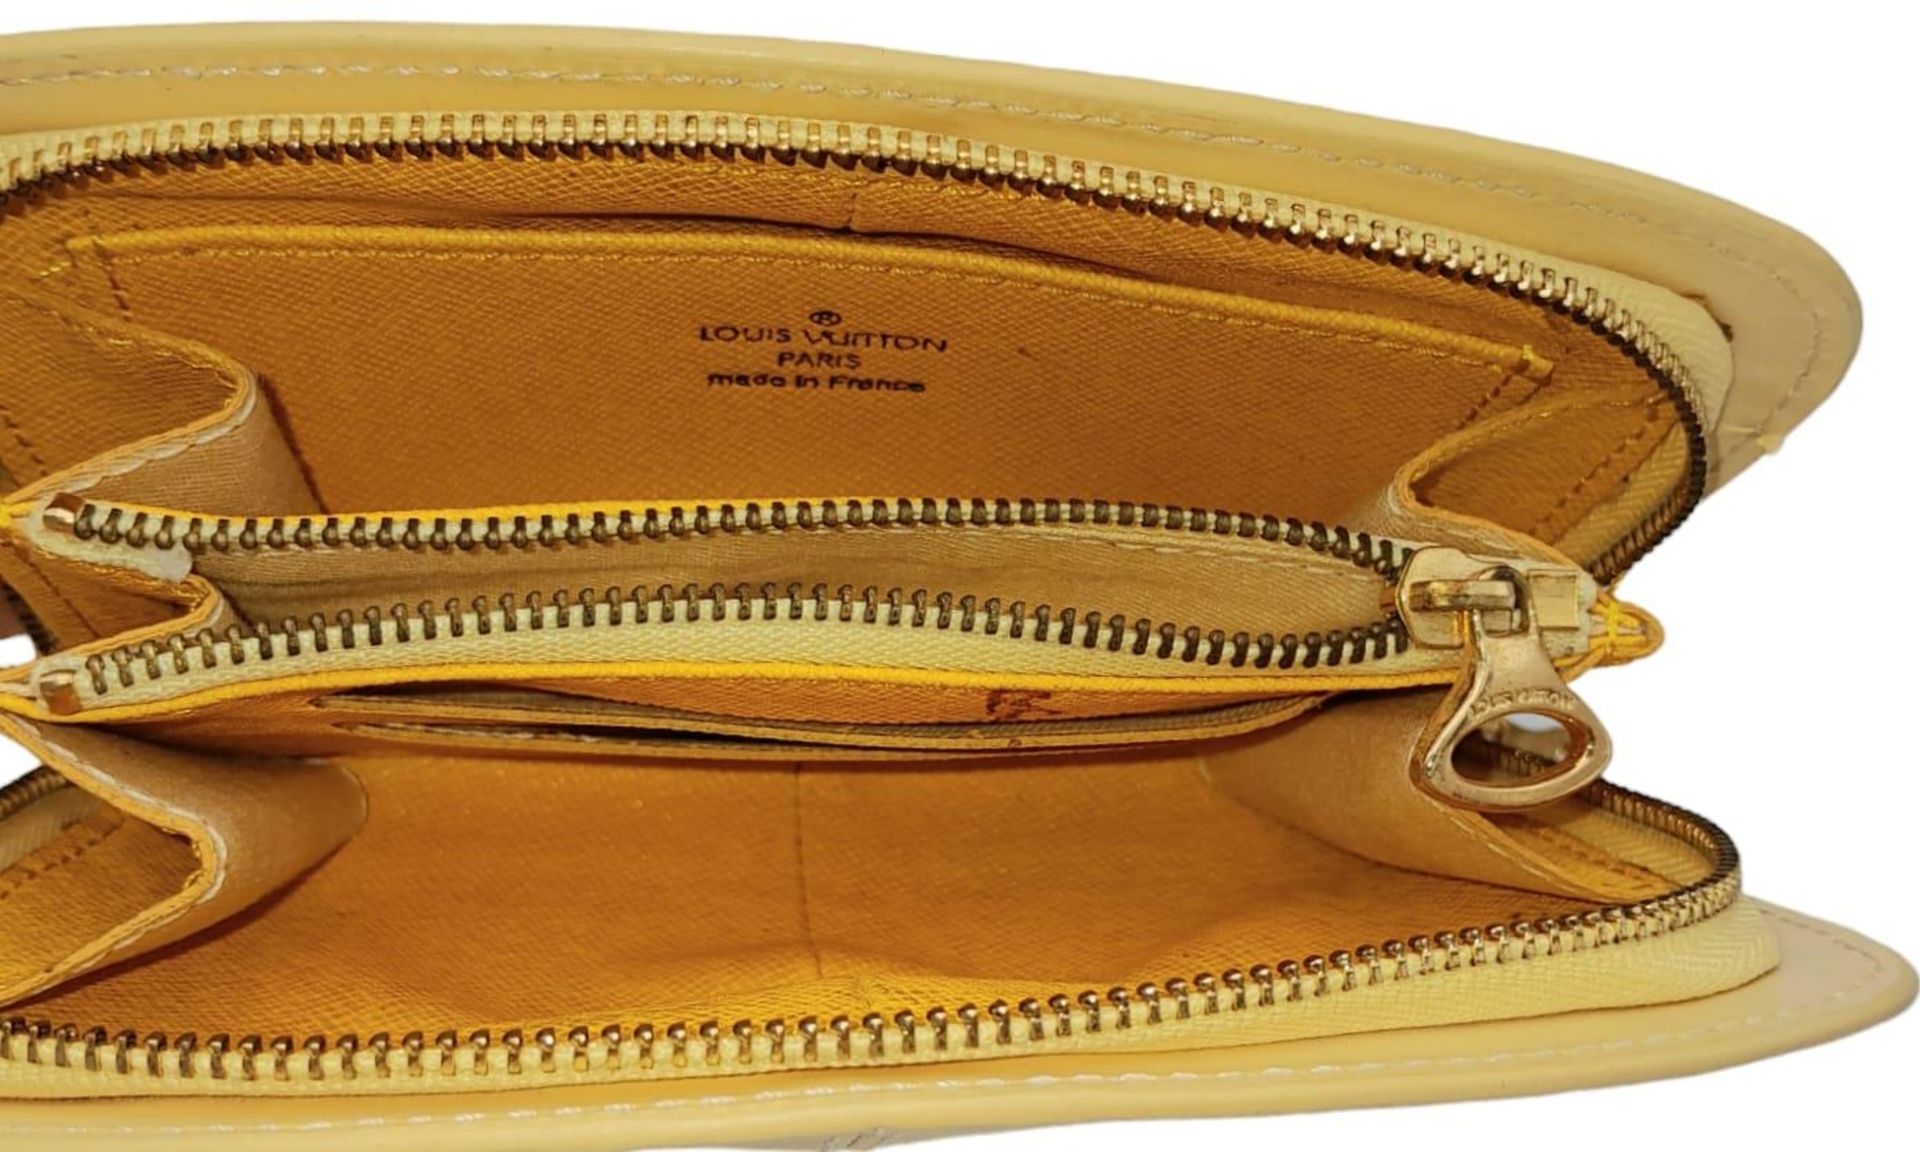 A Louis Vuitton Vanilla Wallet. Epi leather exterior gold-toned hardware and zipped top closure. - Image 6 of 9